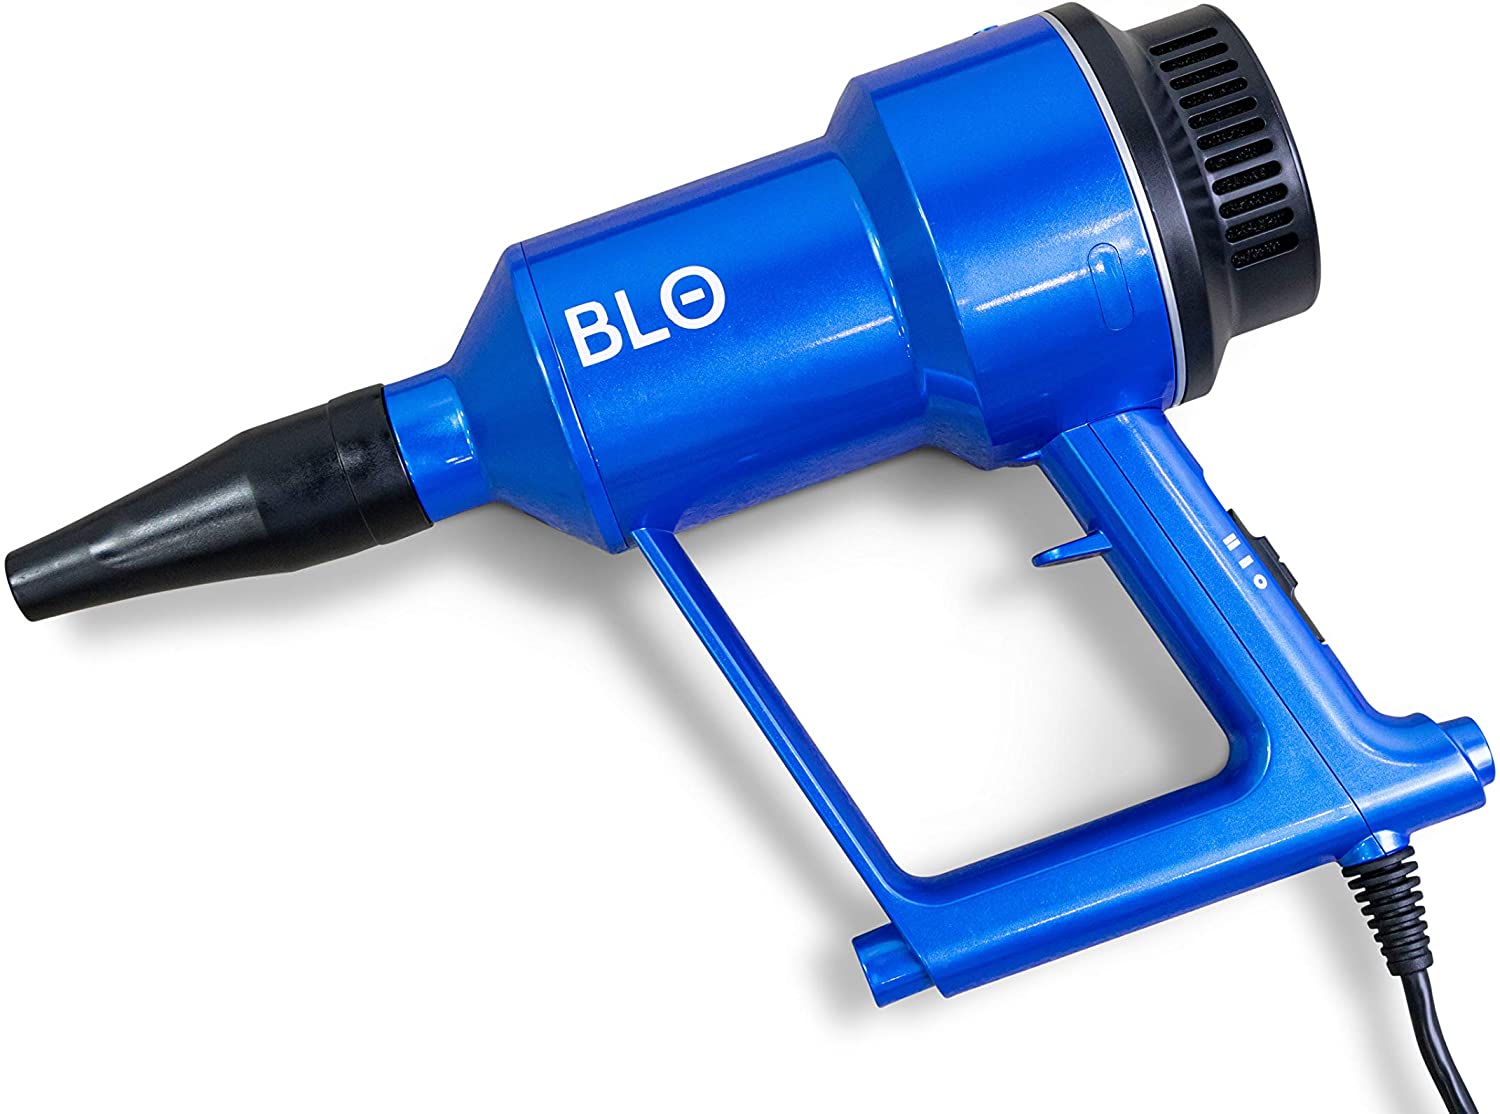 BLO Car Dryer AIR-S - Quickly Dry Your Entire Vehicle After a Wash